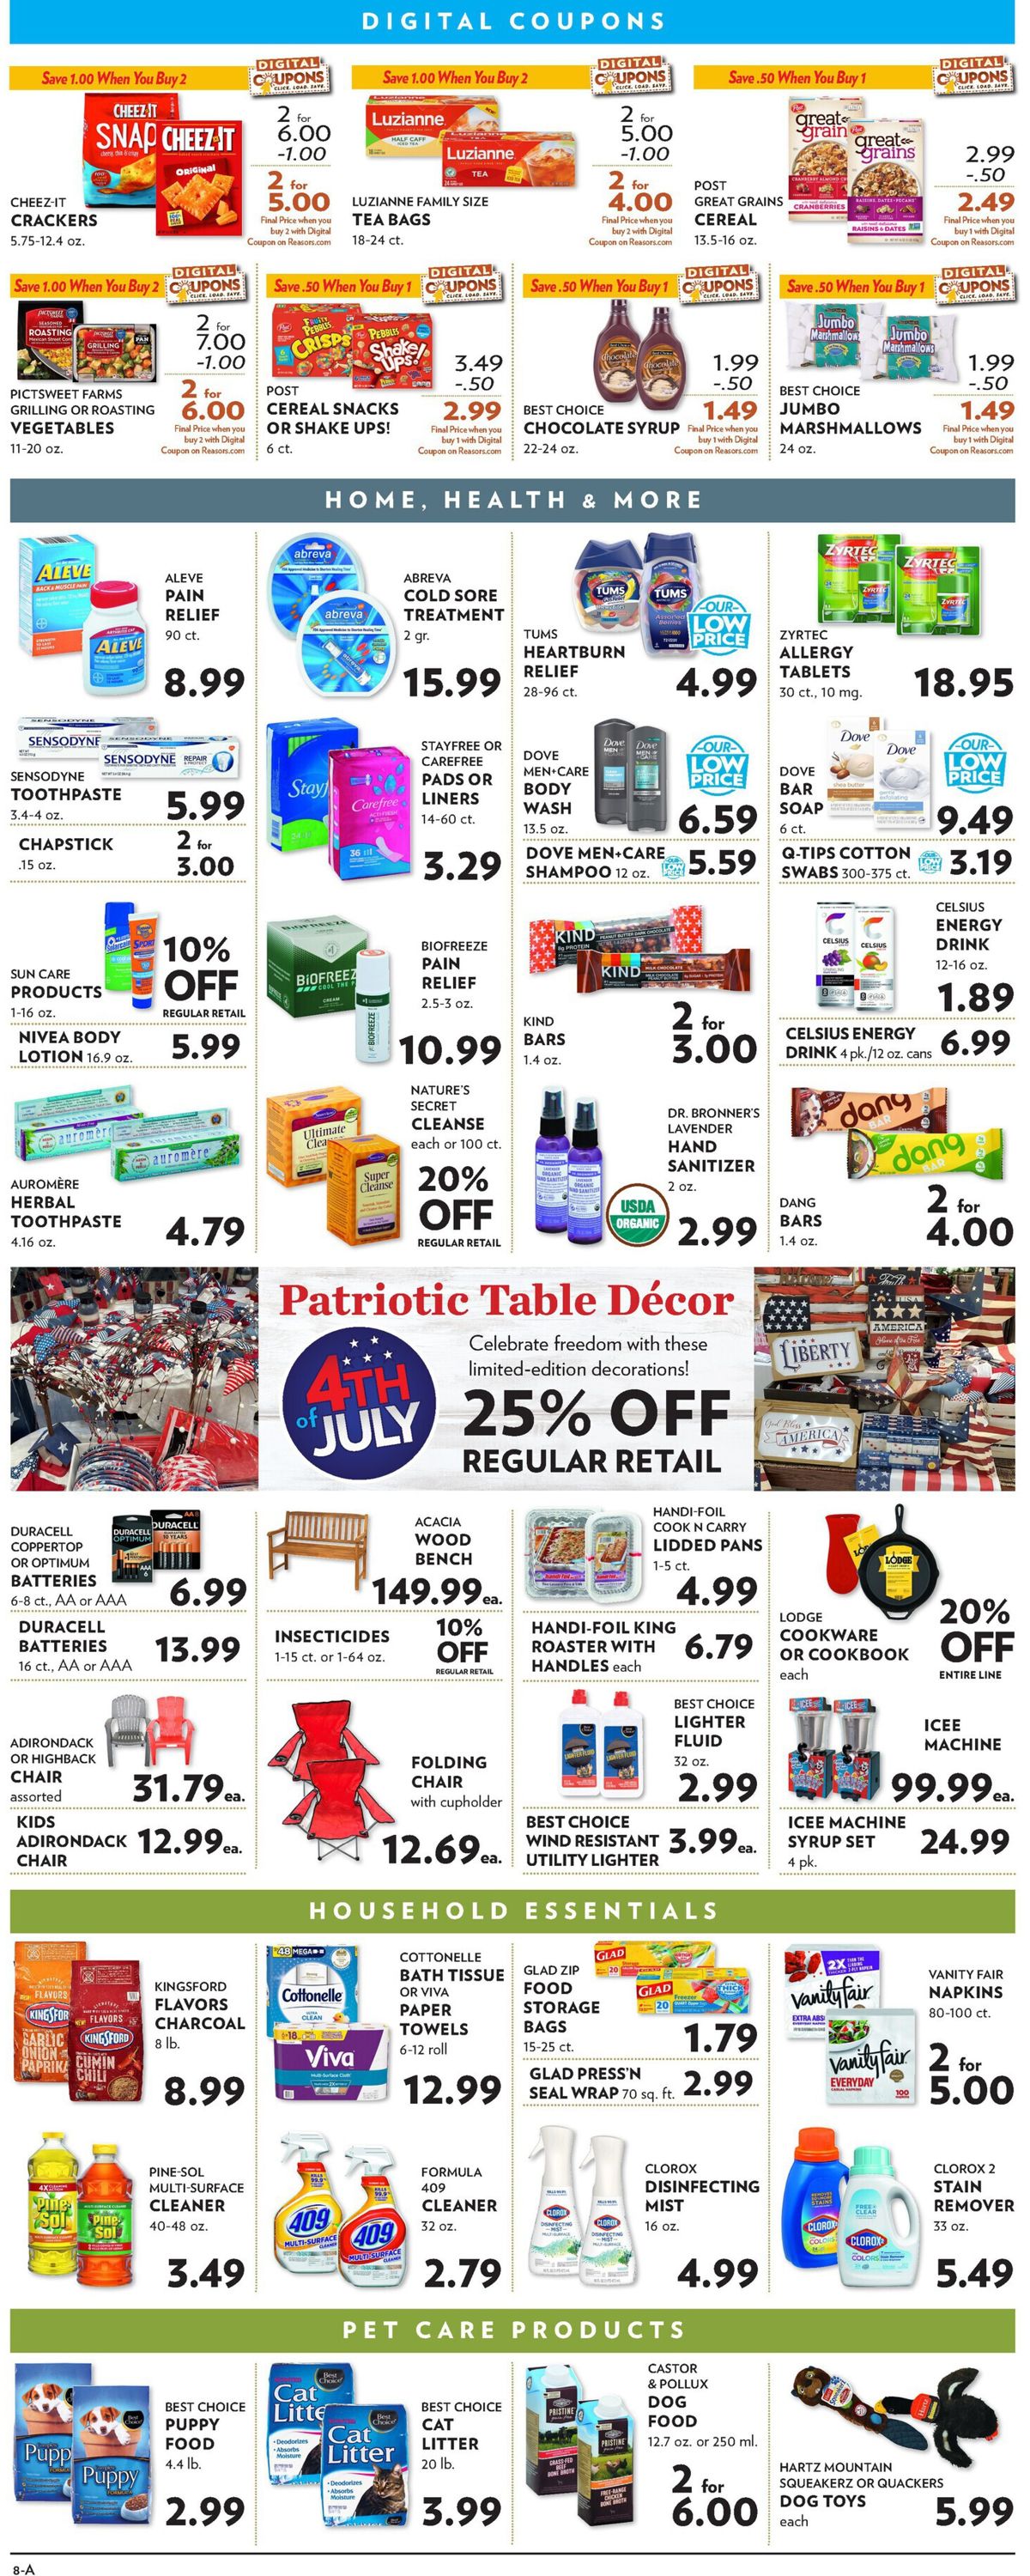 Catalogue Reasor's - 4th of July Sale from 06/29/2022